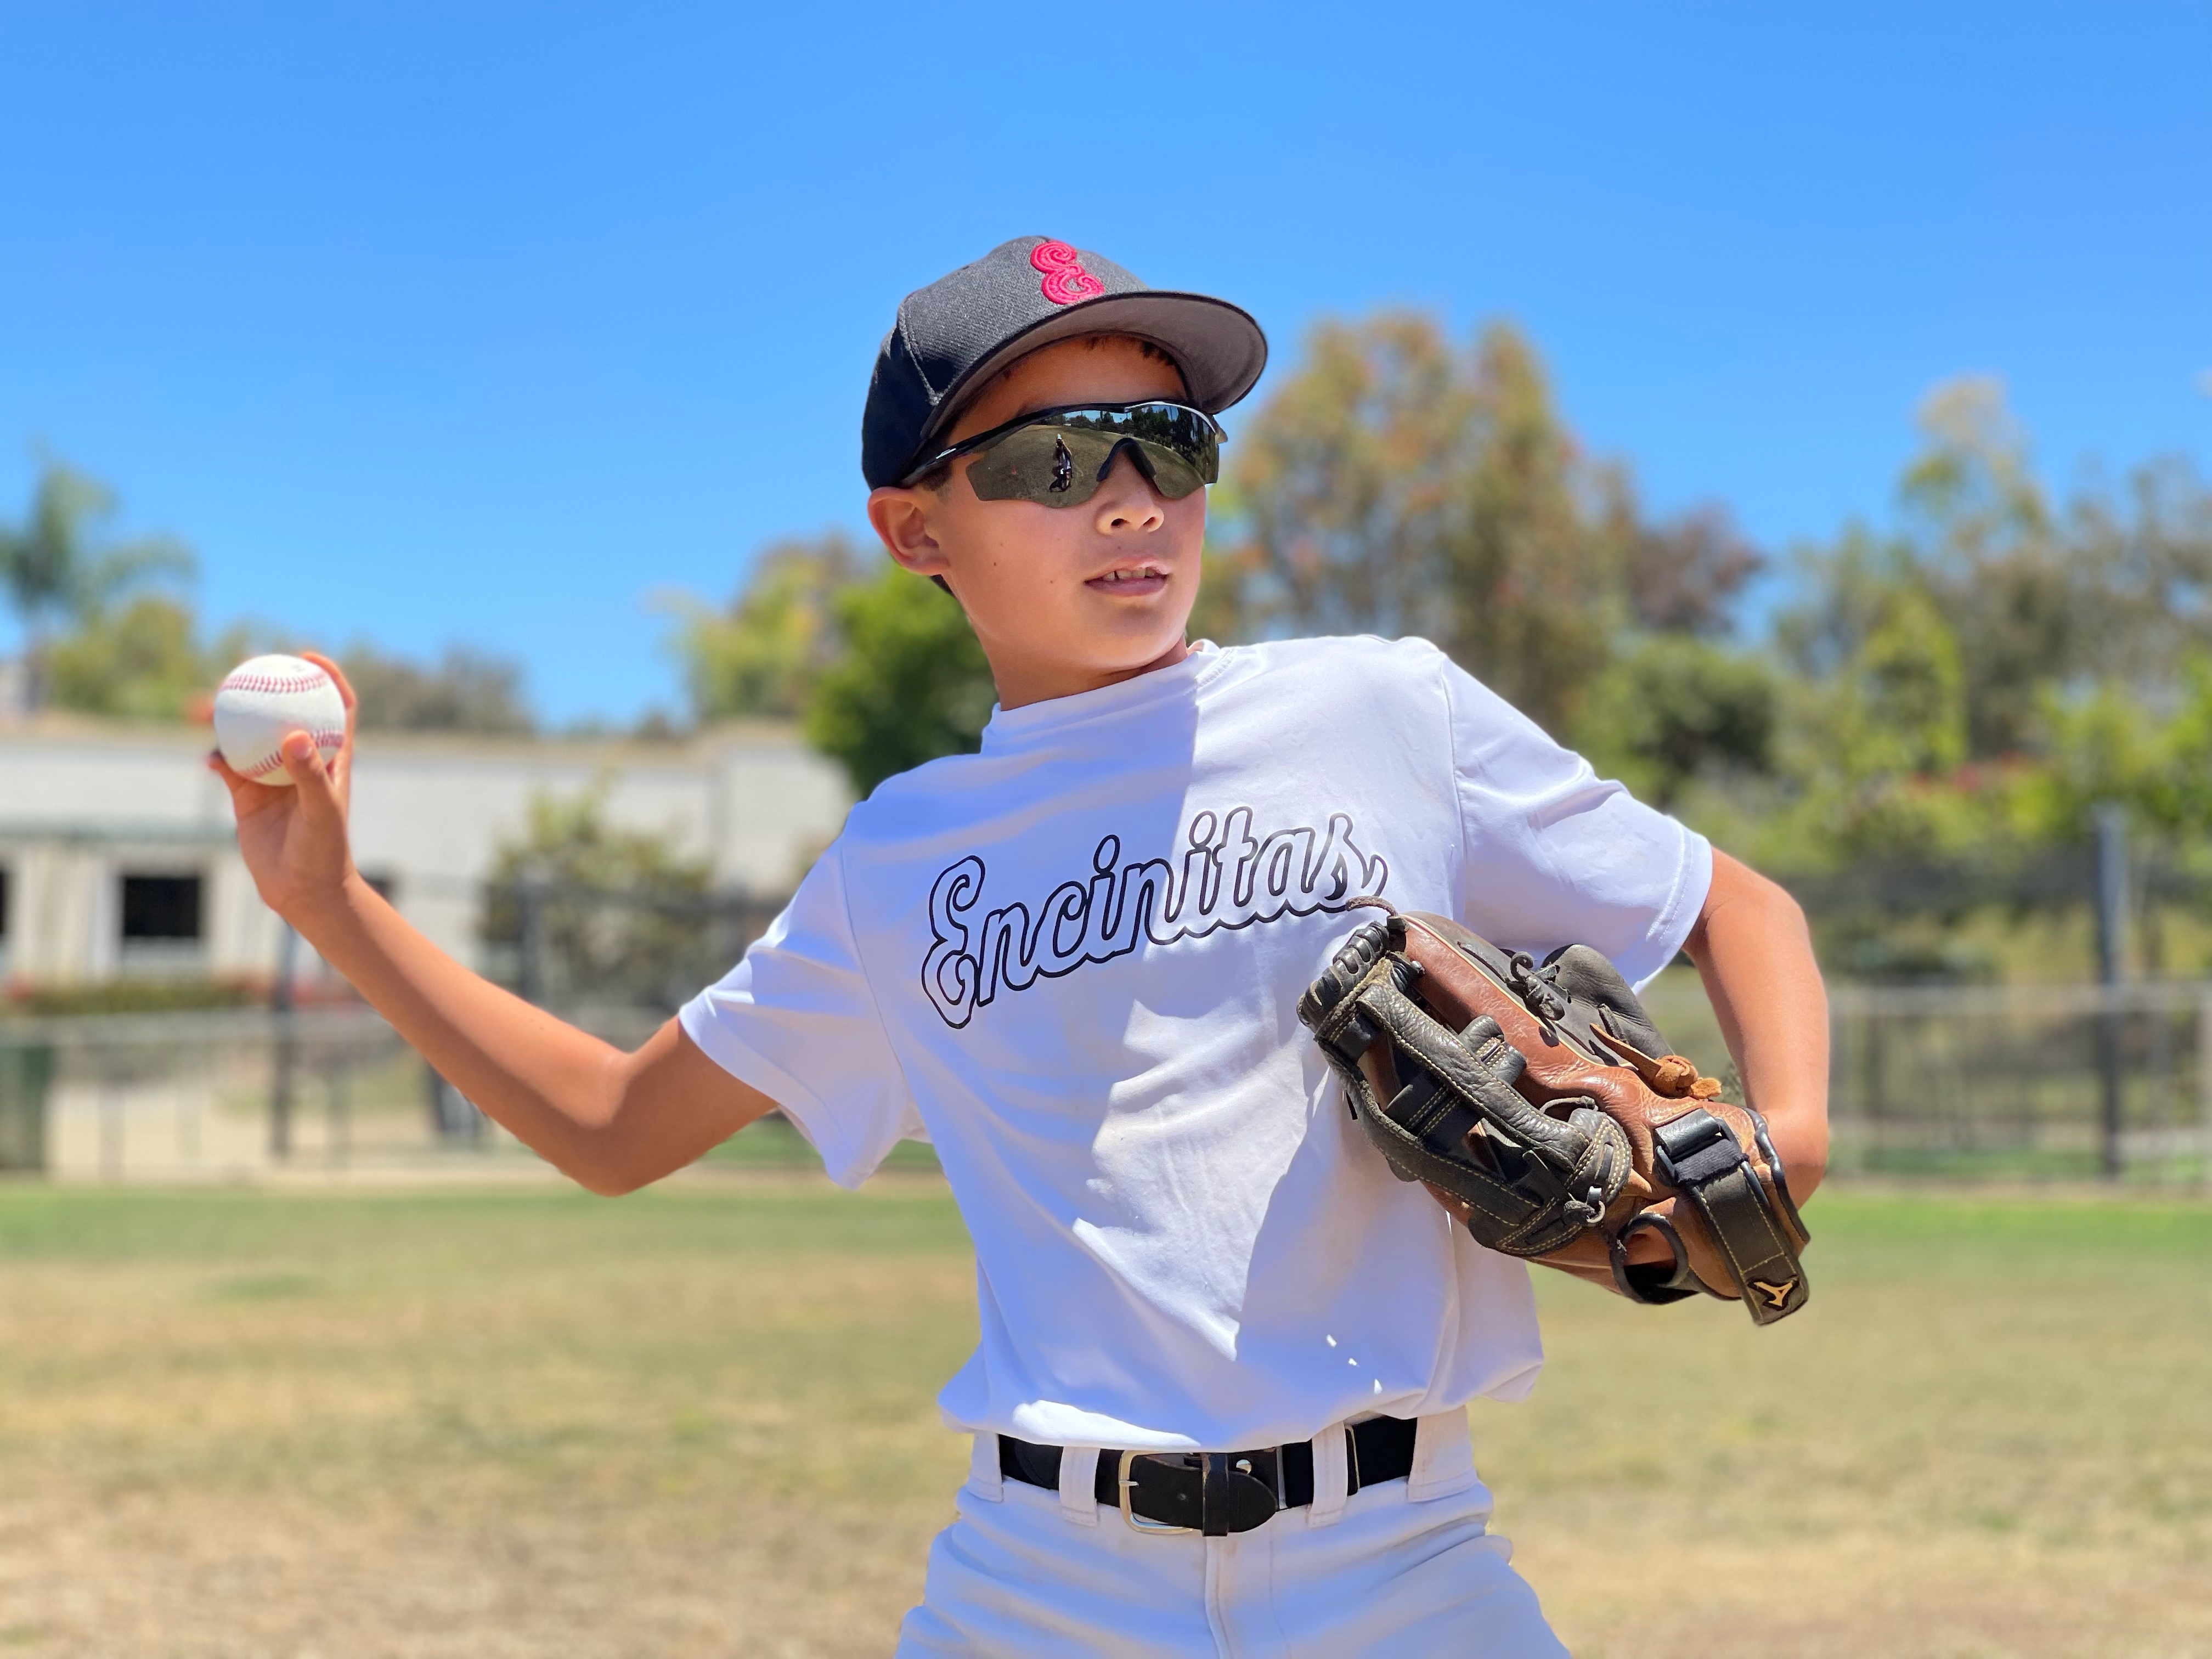 Youth Baseball Makes a Comeback, Kid Reporters' Notebook